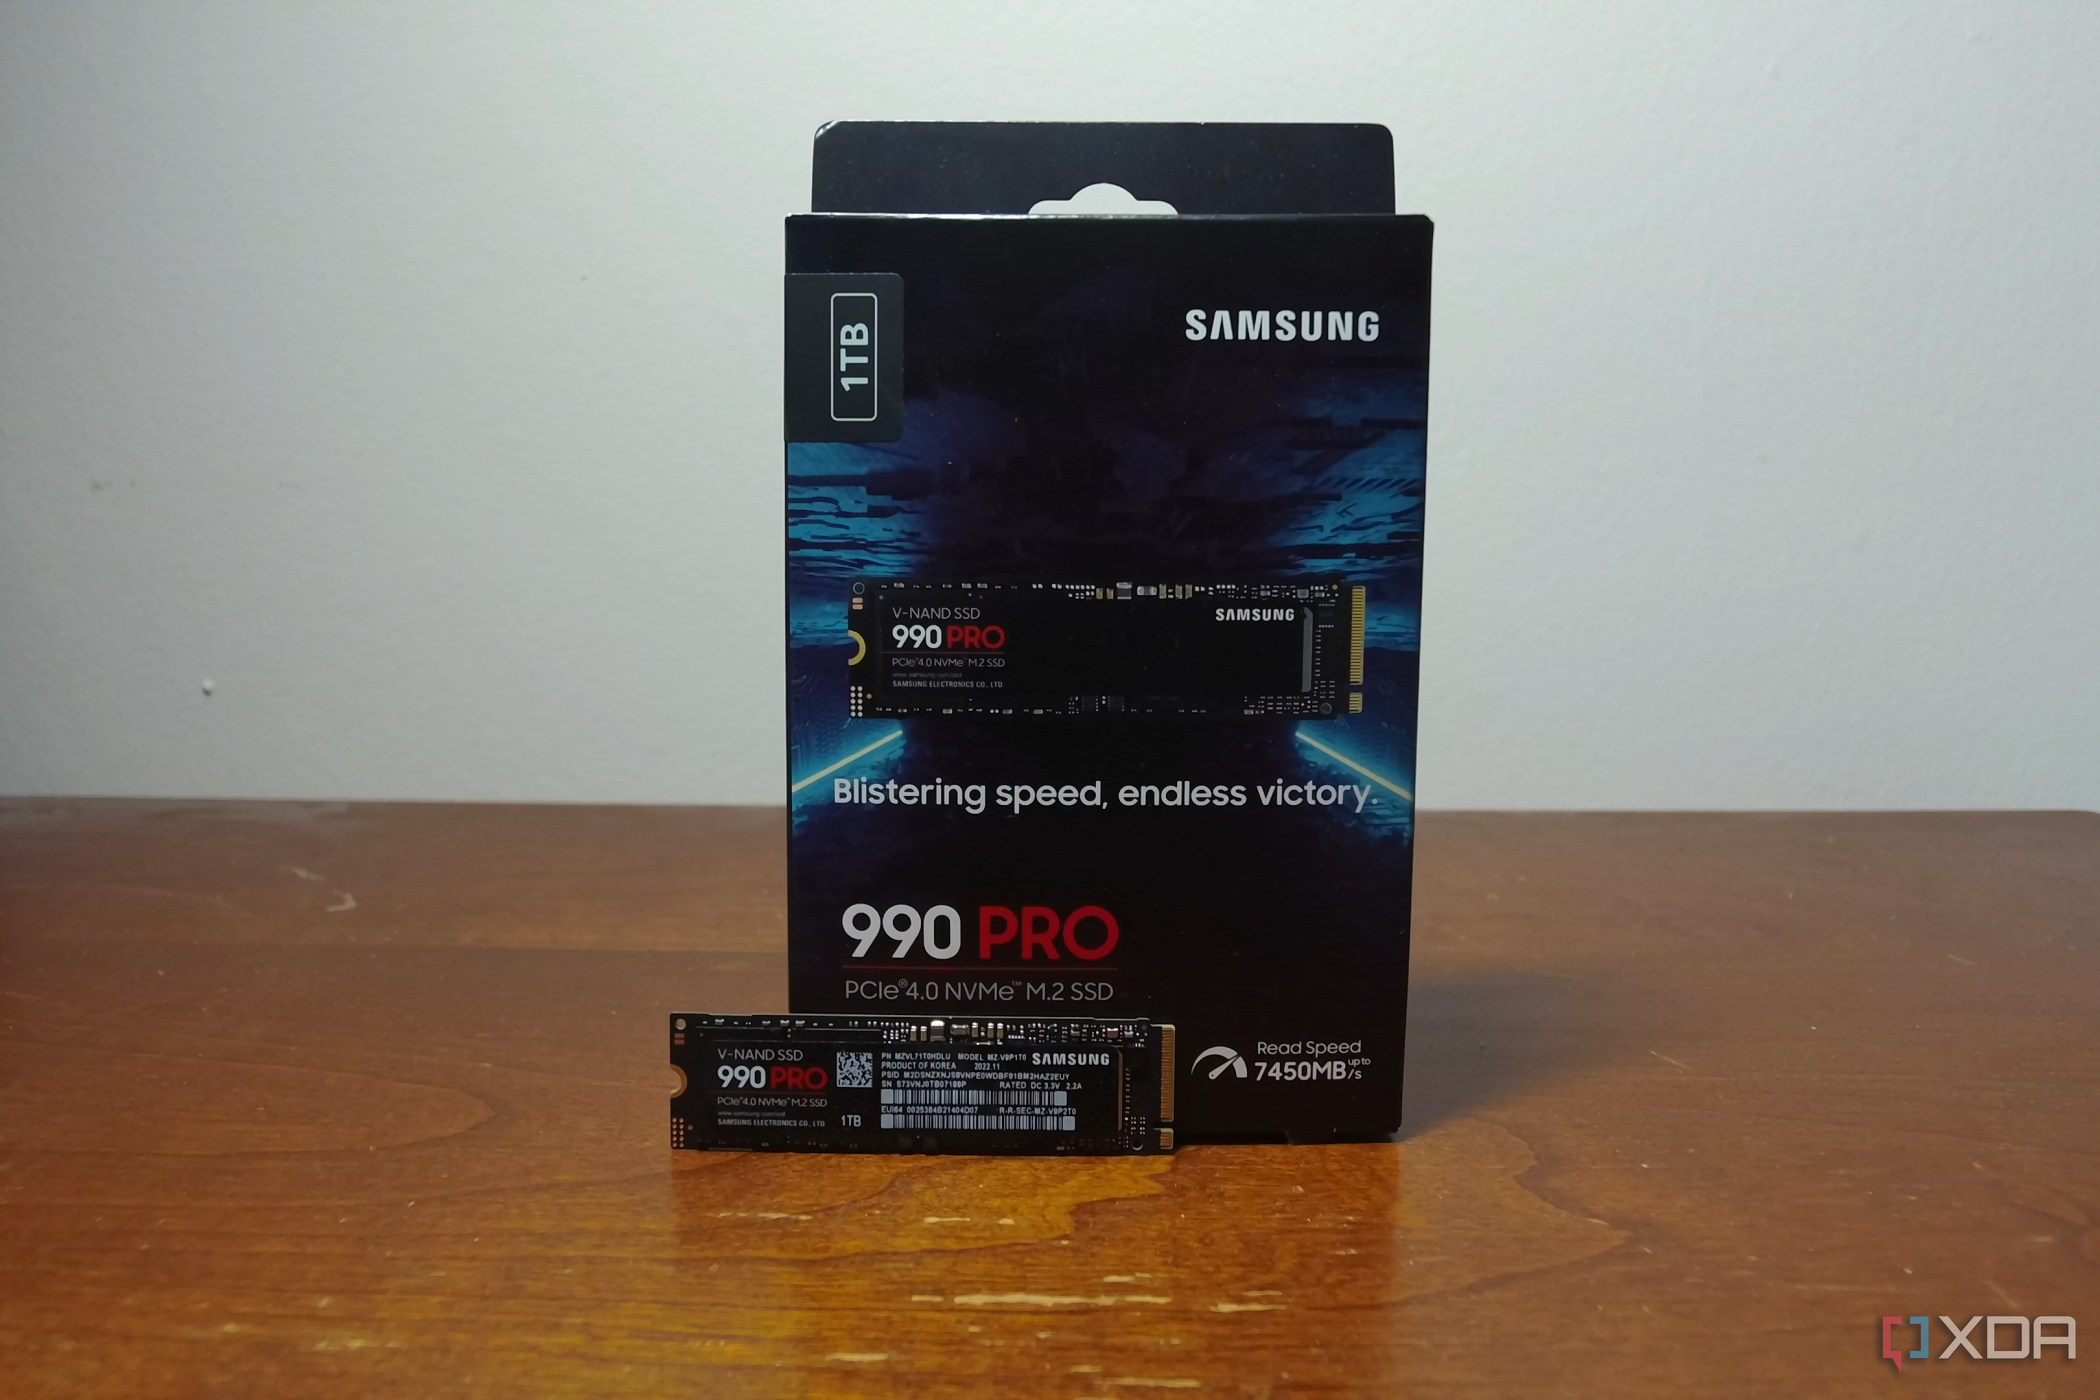 Samsung SSD 990 Pro Review